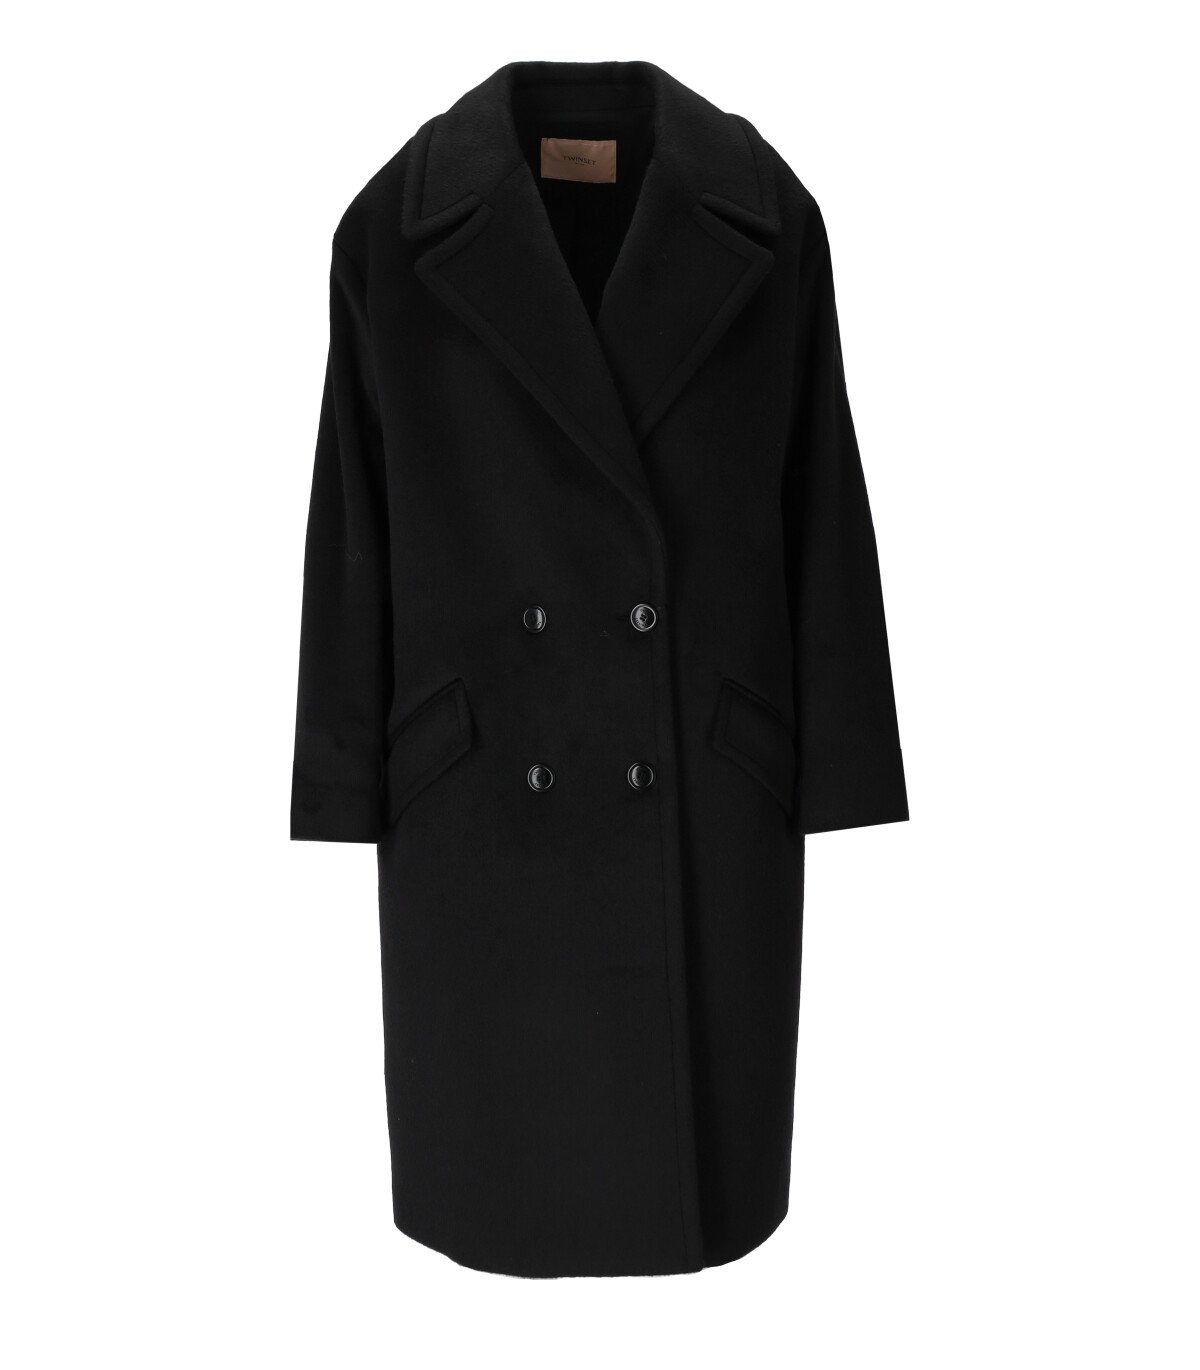 TWINSET BLACK DOUBLE-BREASTED COAT